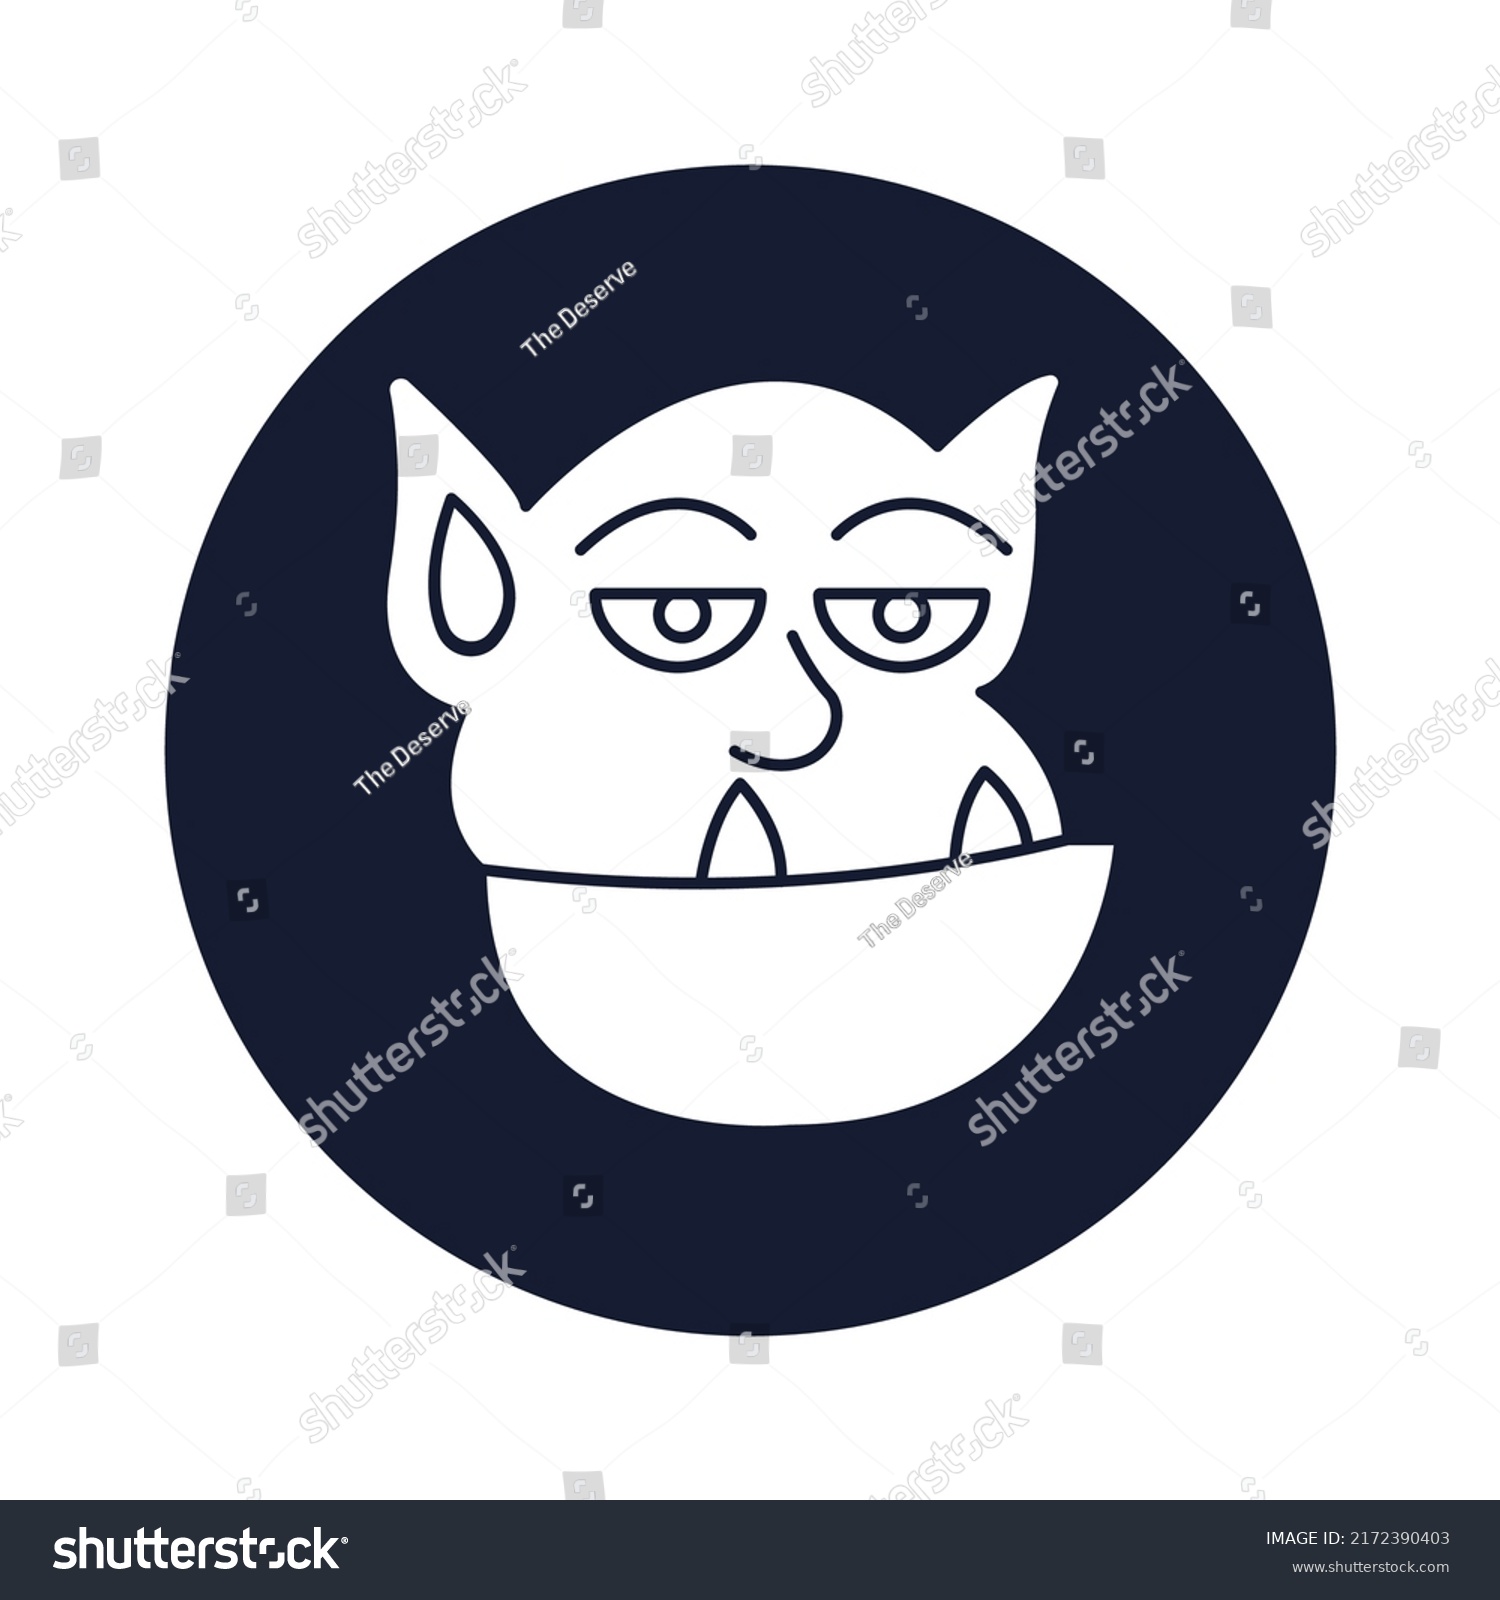 SVG of Ogre Vector icon which is suitable for commercial work and easily modify or edit it

 svg